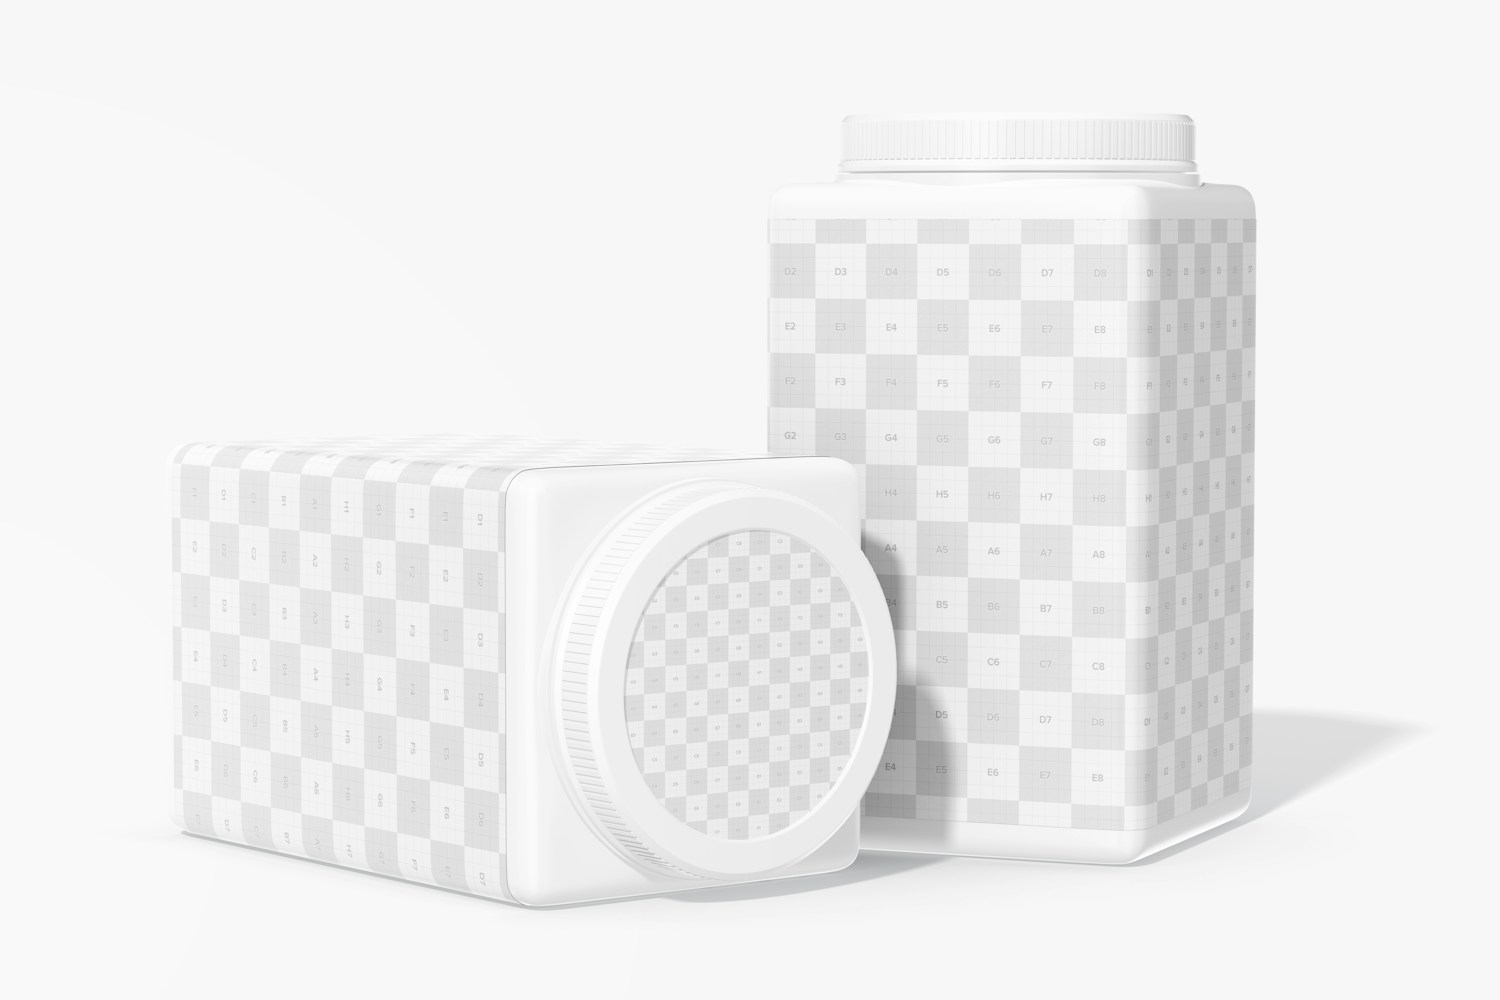 Square Protein Powder Containers Mockup, Standing and Dropped